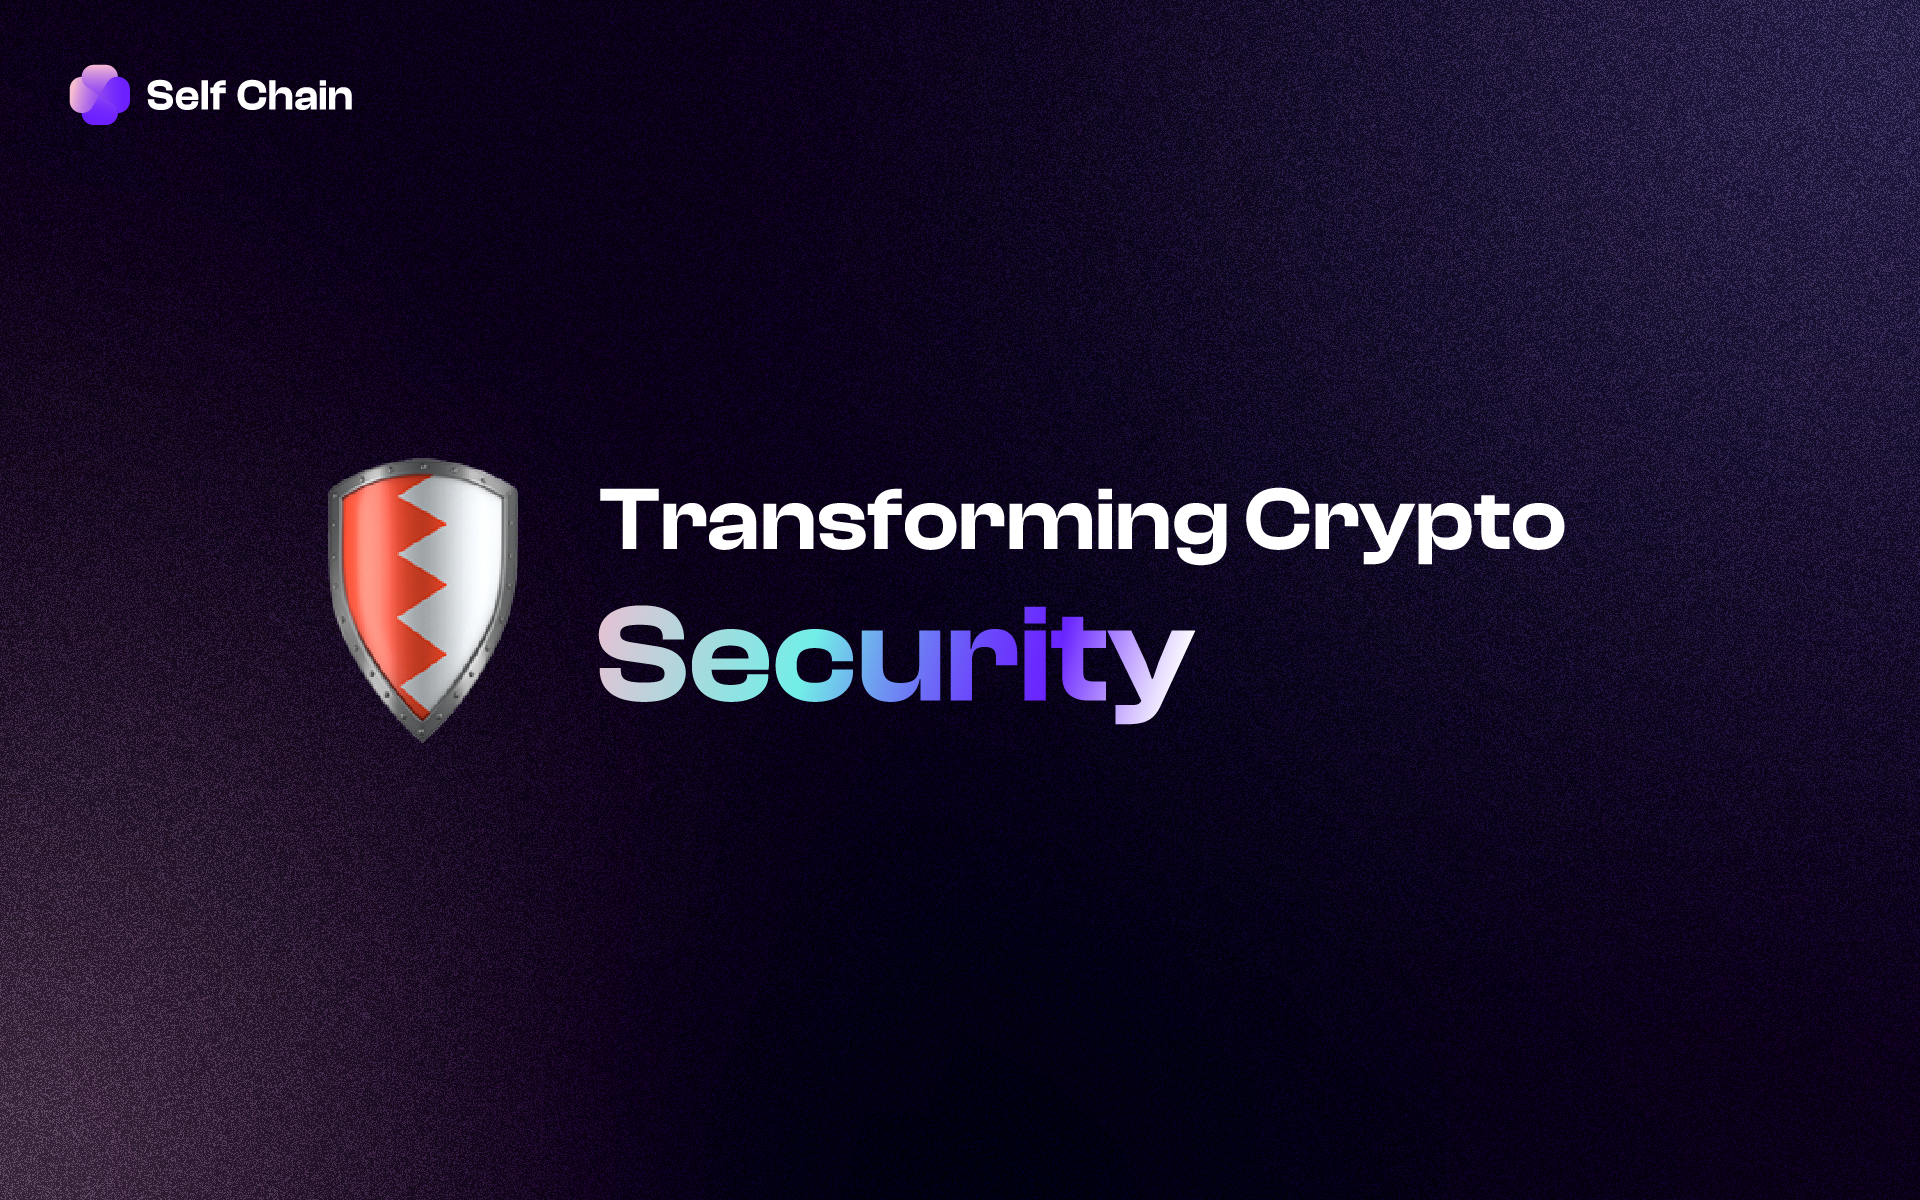 Transforming Crypto Security: Self Chain and the Rise of Non-Custodial Wallets